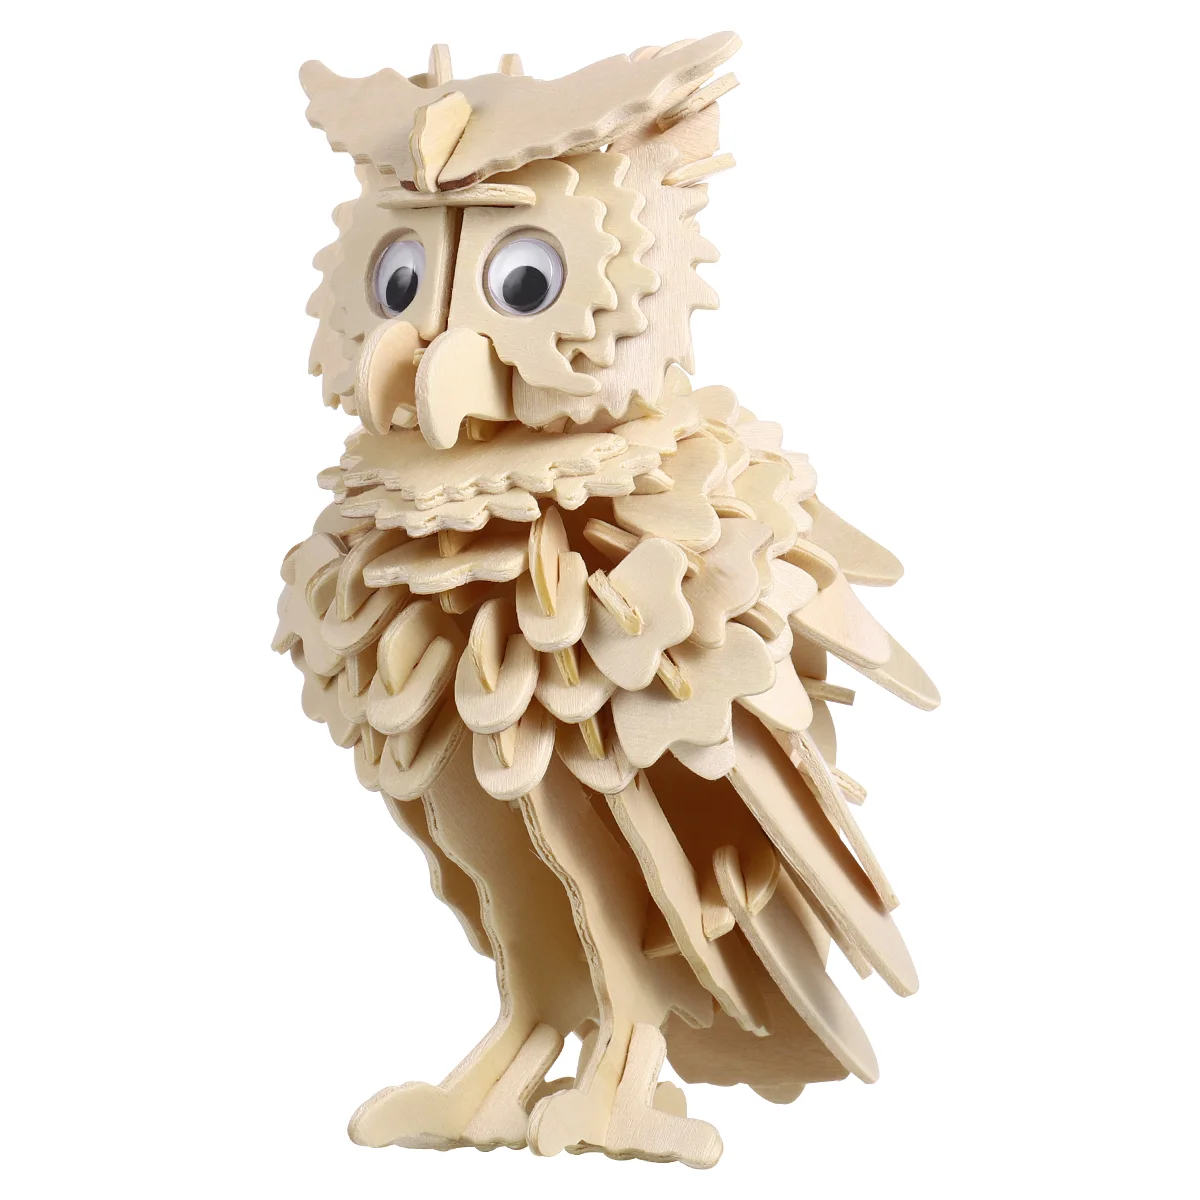 

3D Puzzle Owl Puzzle Jigsaw Wood Craft DIY Construction Puzzle for Kids Adults